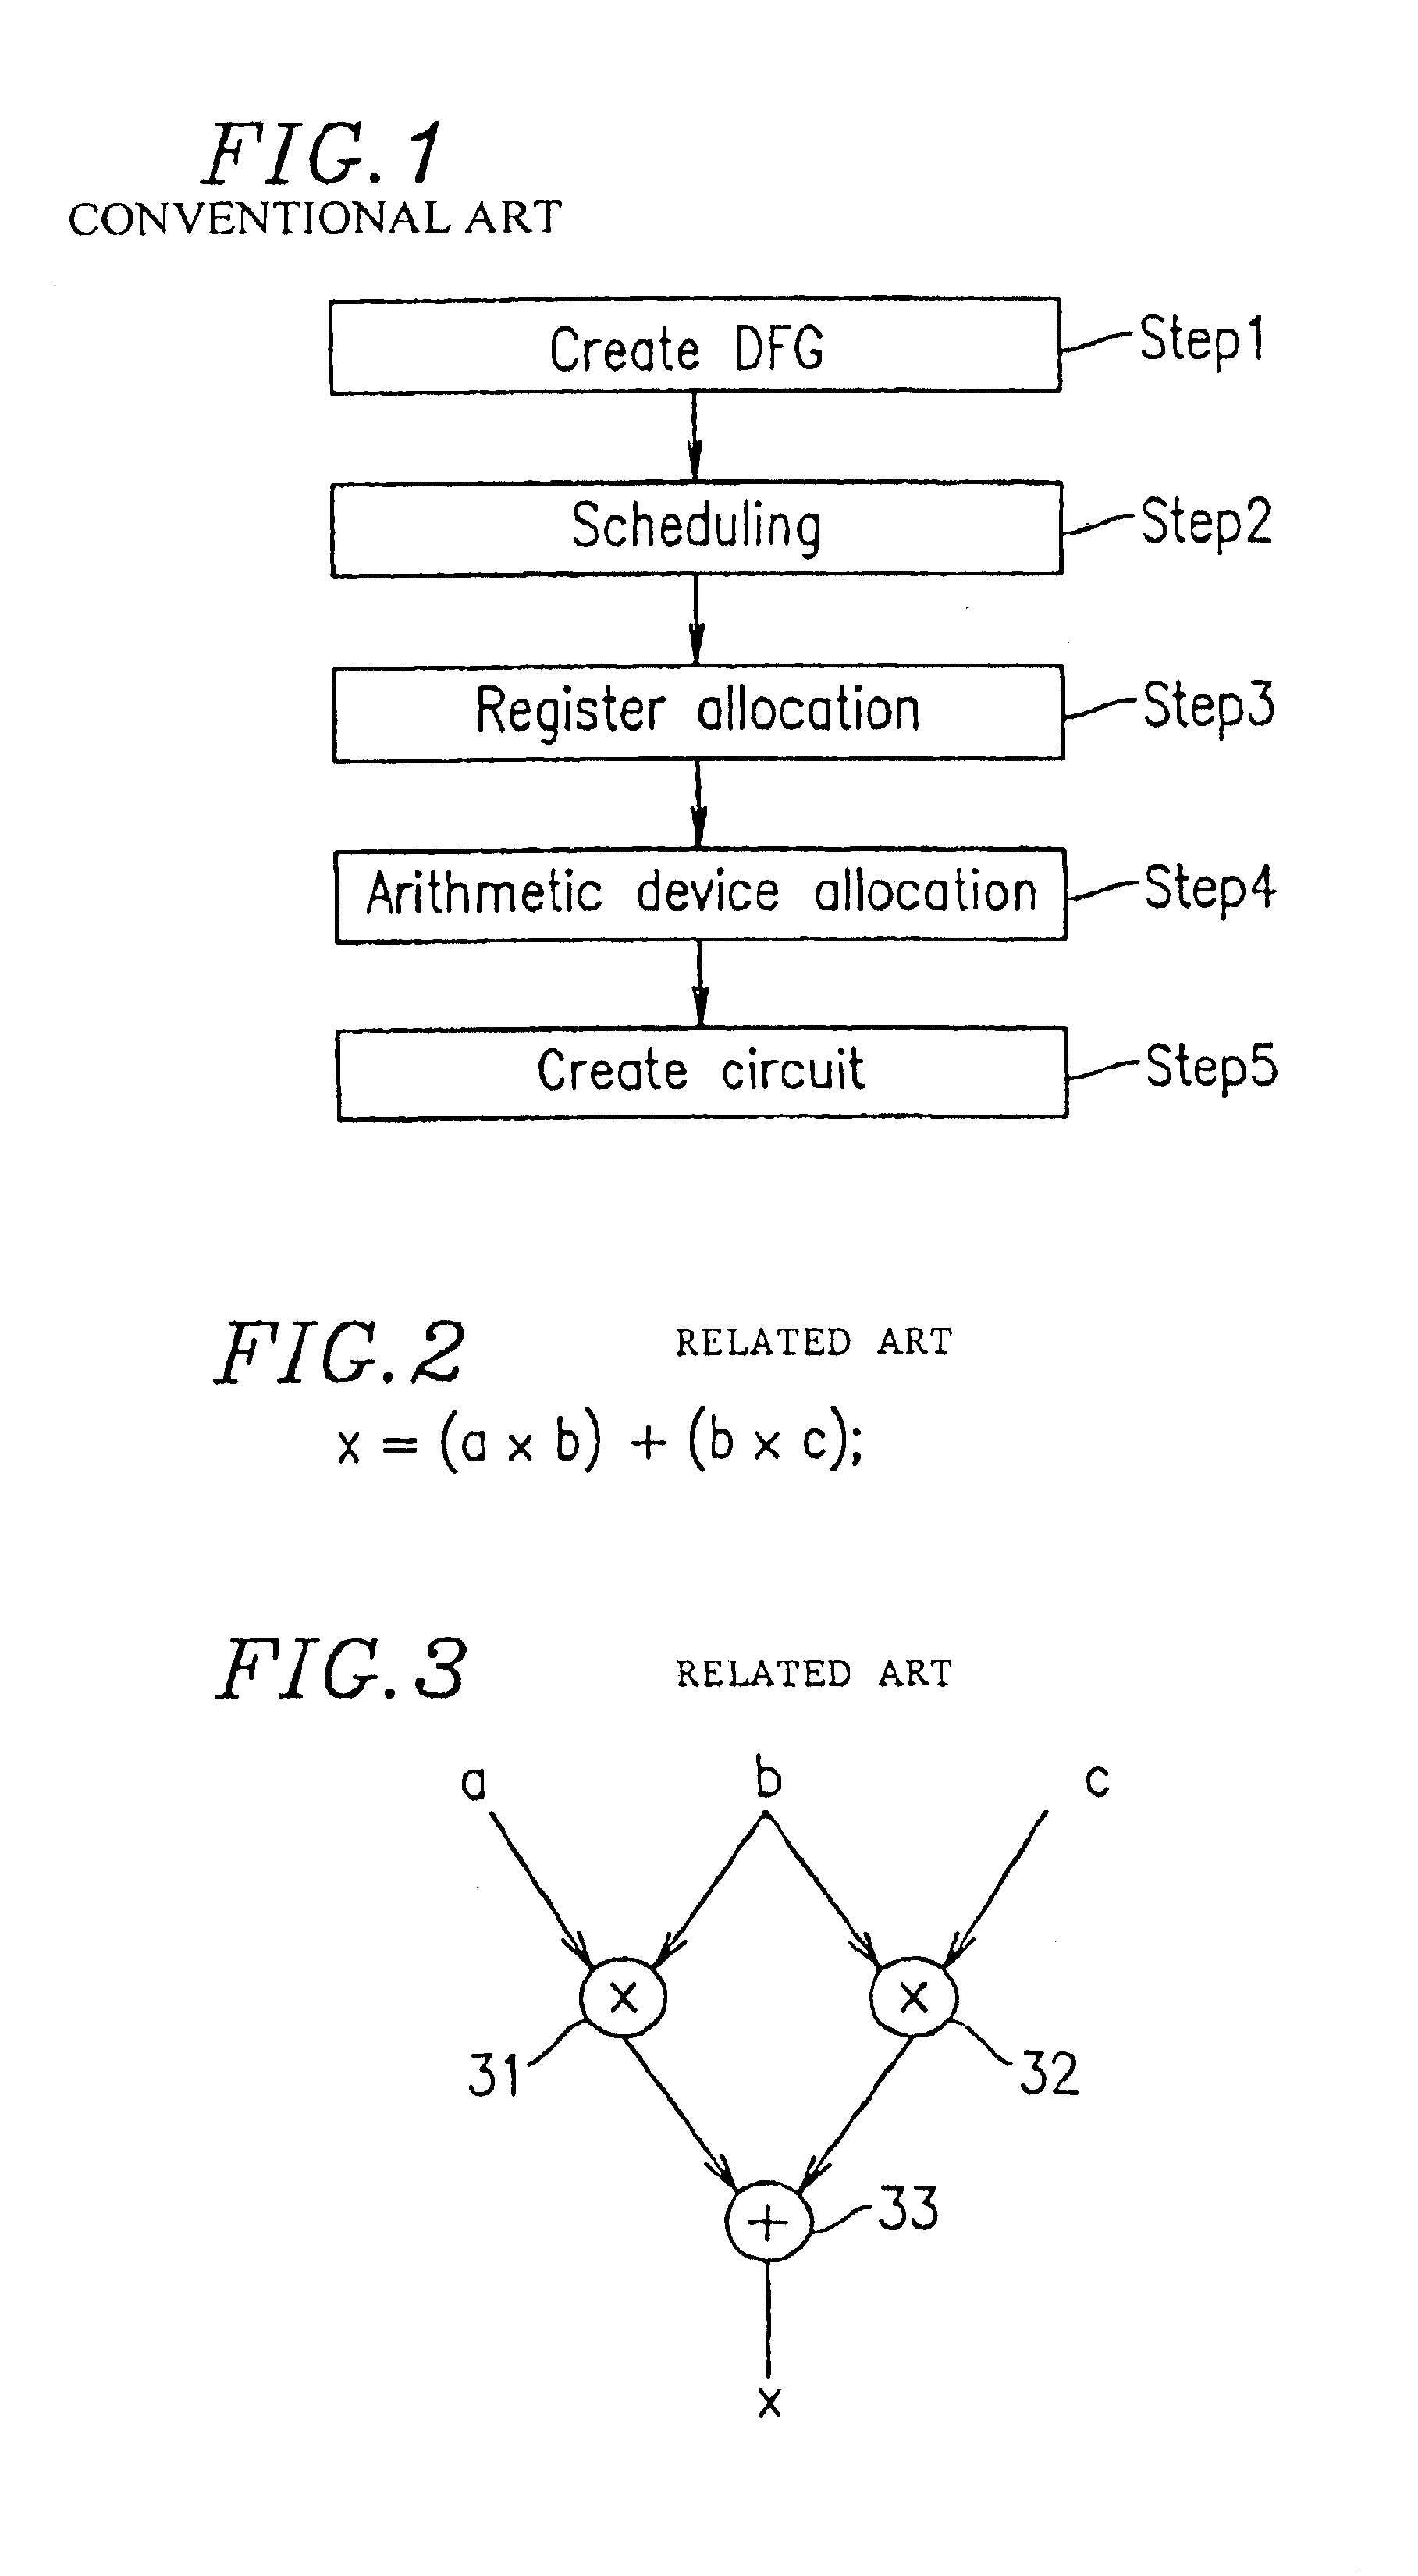 Method for designing arithmetic device allocation